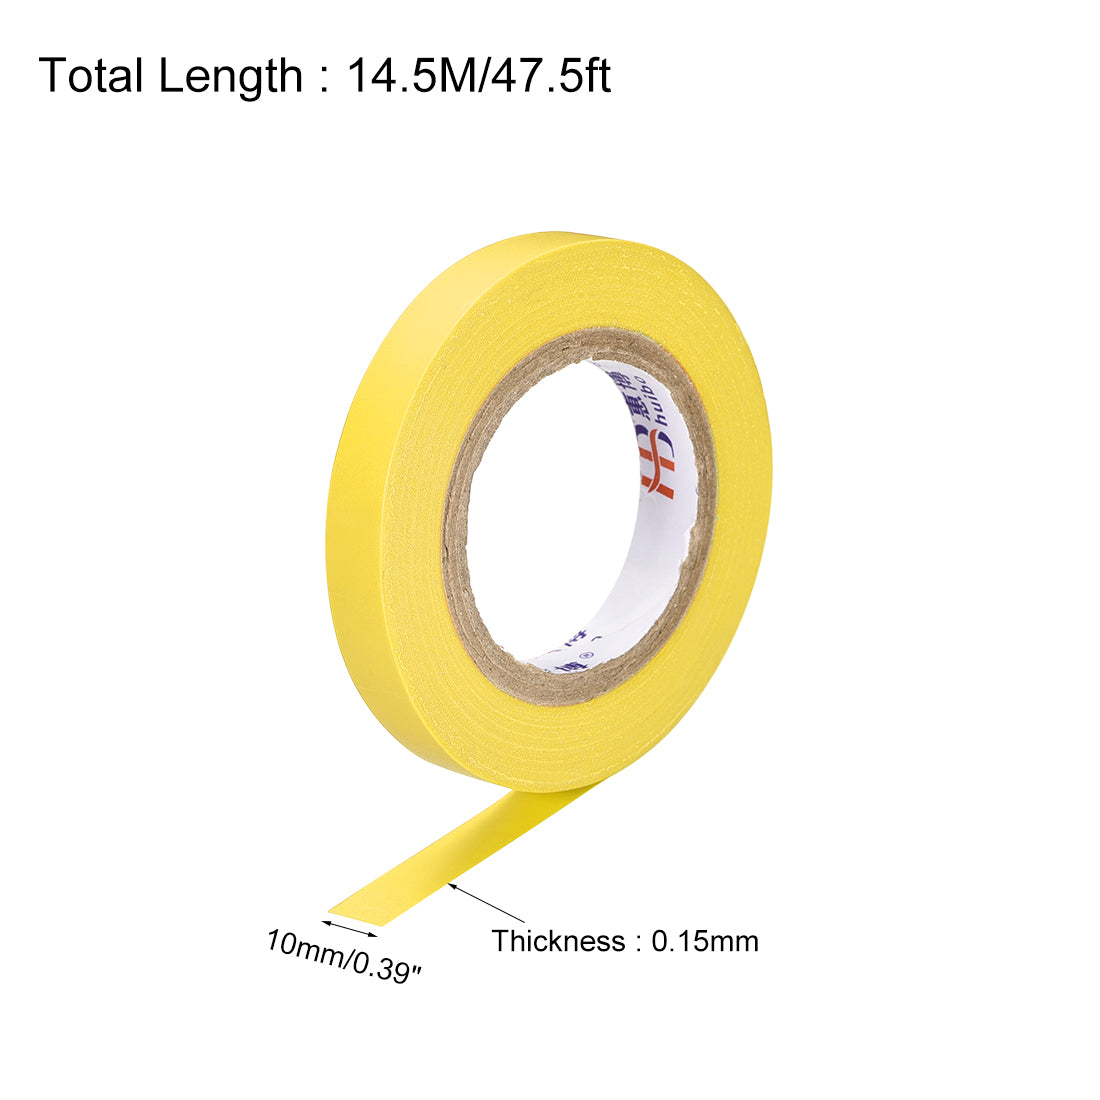 uxcell Uxcell Insulating Tape 10mm Width 14.5M Long 0.15mm Thick PVC Electrical Tape Rated for Max. 400V  80C Use Yellow 2pcs